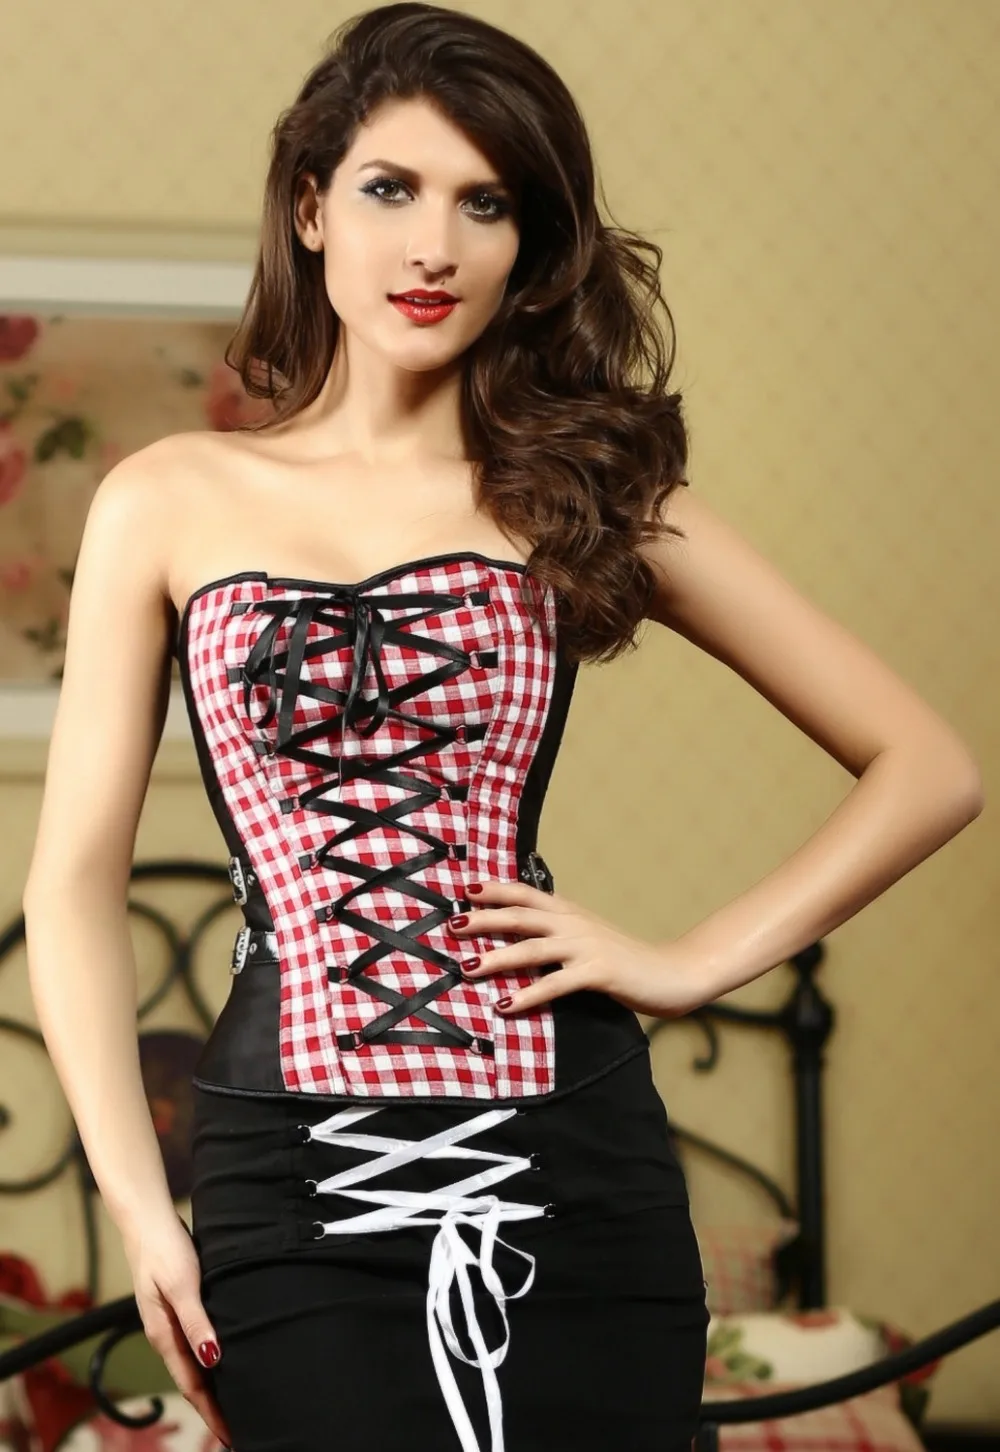 Pretty Girl Plaid Corset With Crisscross Ribbon LC Sexy Lace Up With G String In Bustiers